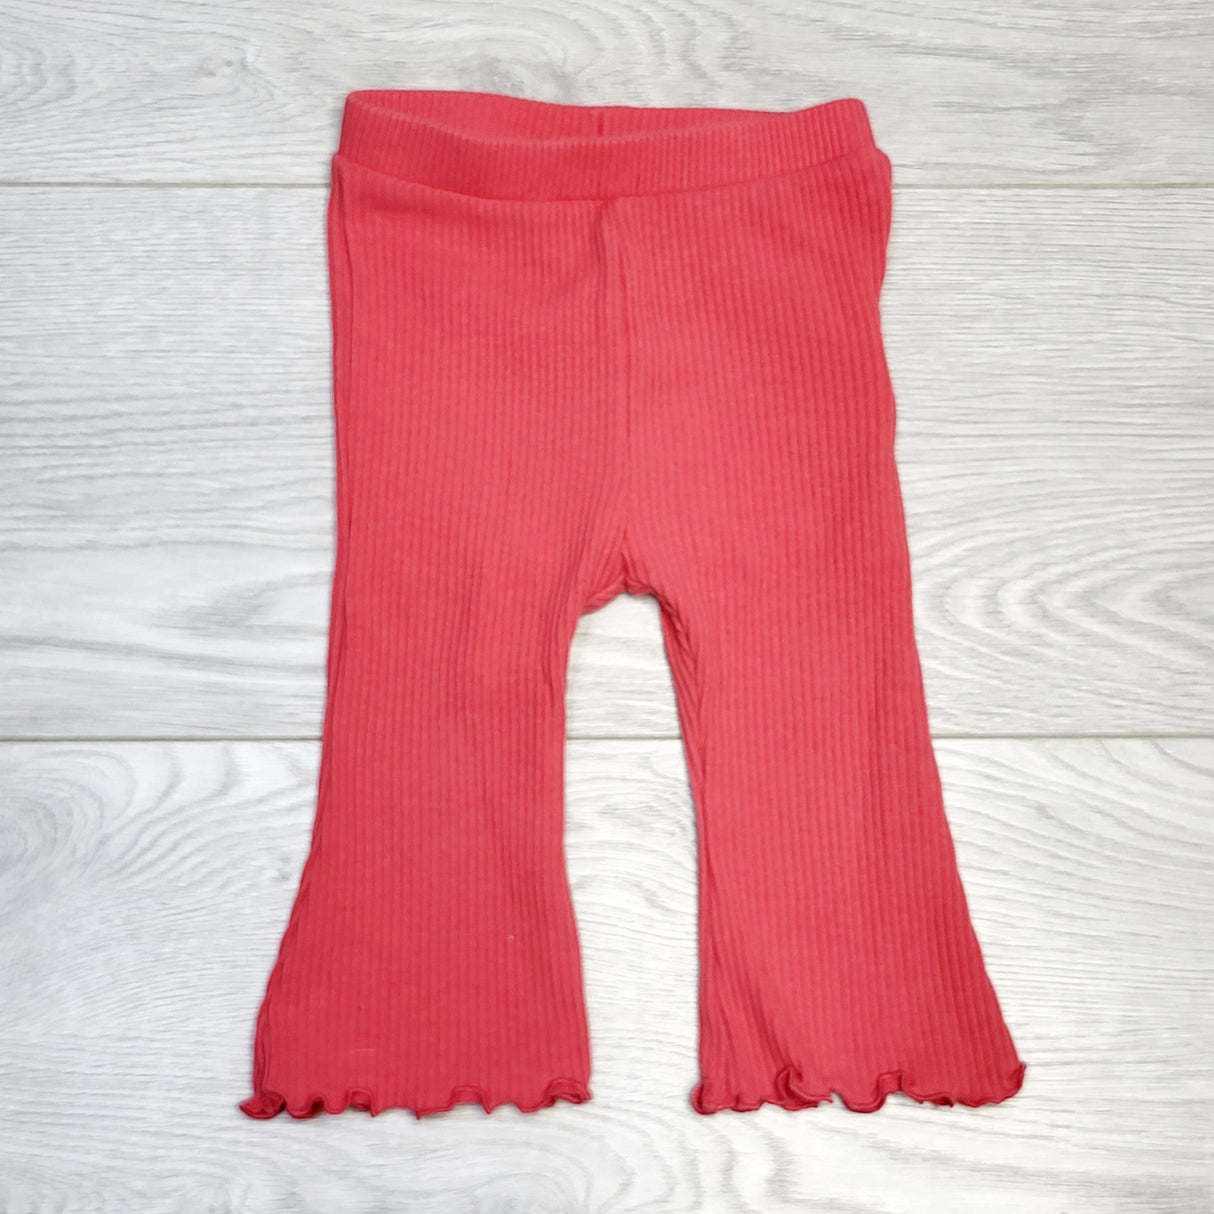 COWN1 - Old Navy pink ribbed flare leggings. Size 3-6 months